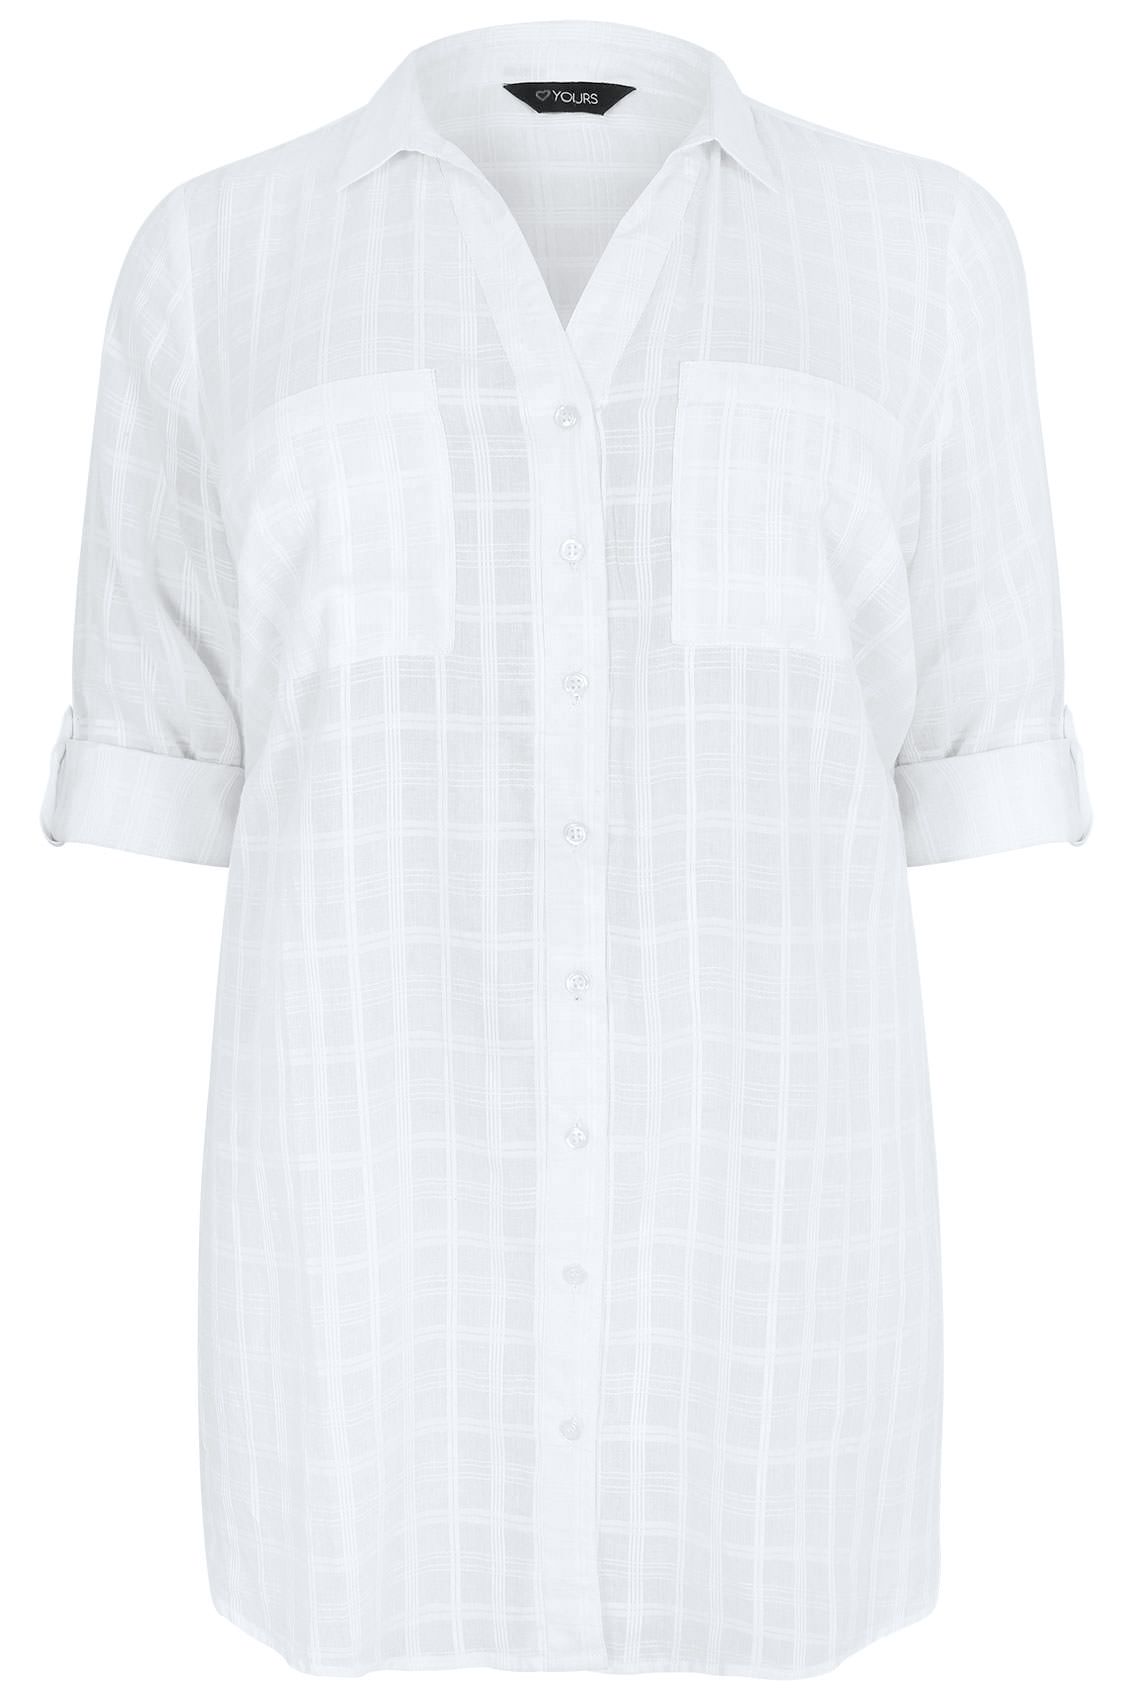 White Checked Longline Shirt With Waist Tie, Plus size 16 to 36